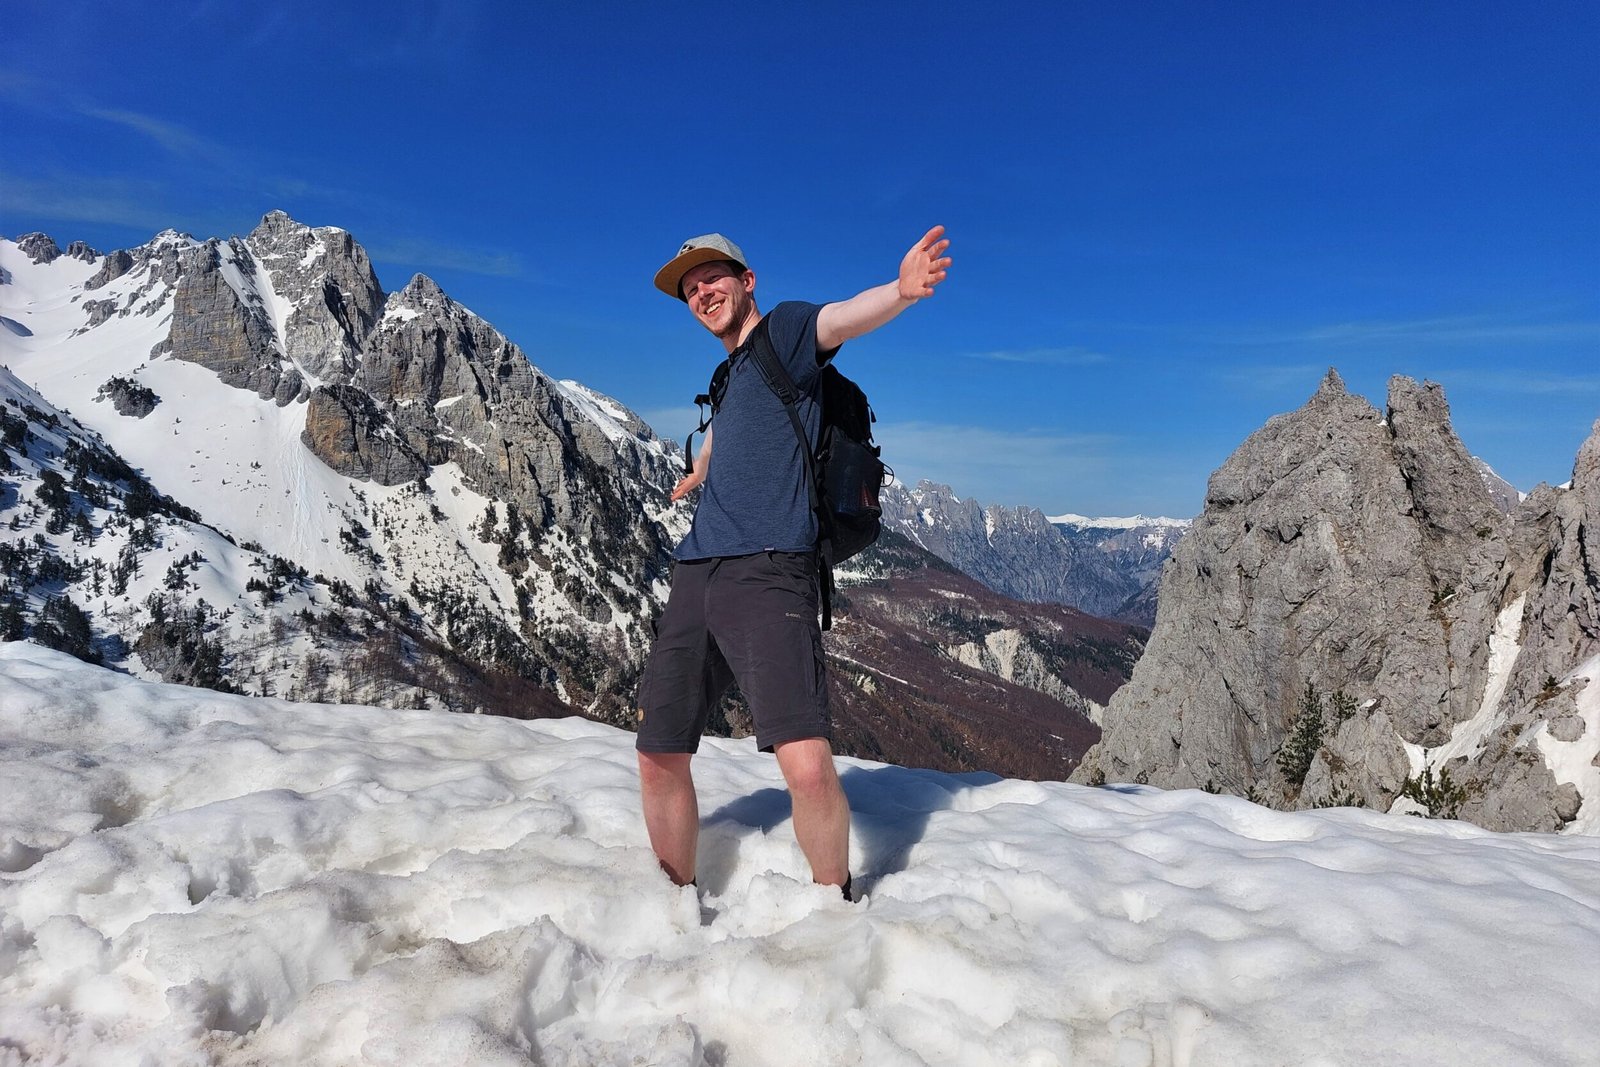 a man standing in the snow ony wearing shorts and a t-shirt, surrounded by a stunning mountain landscape